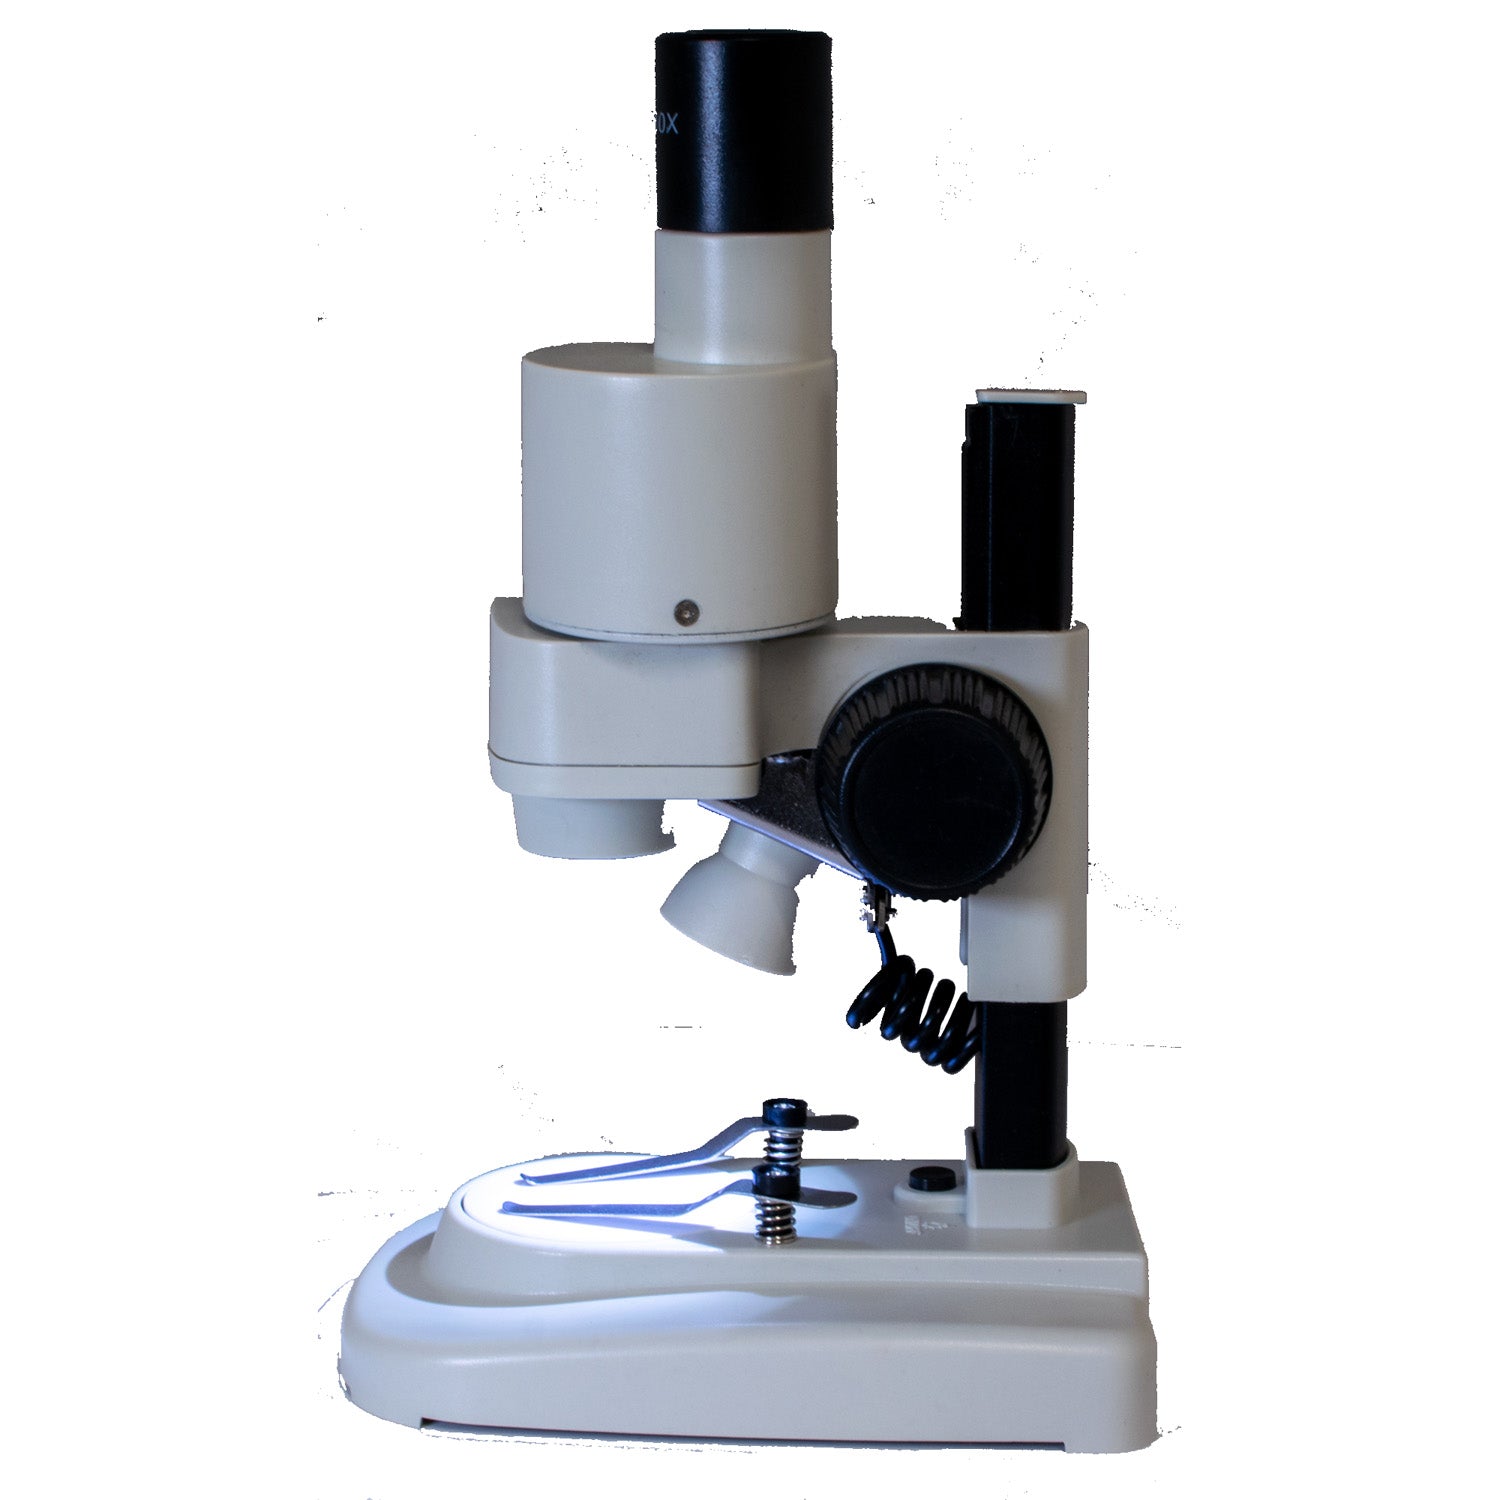 Inspection microscope, 20X with built-in light source